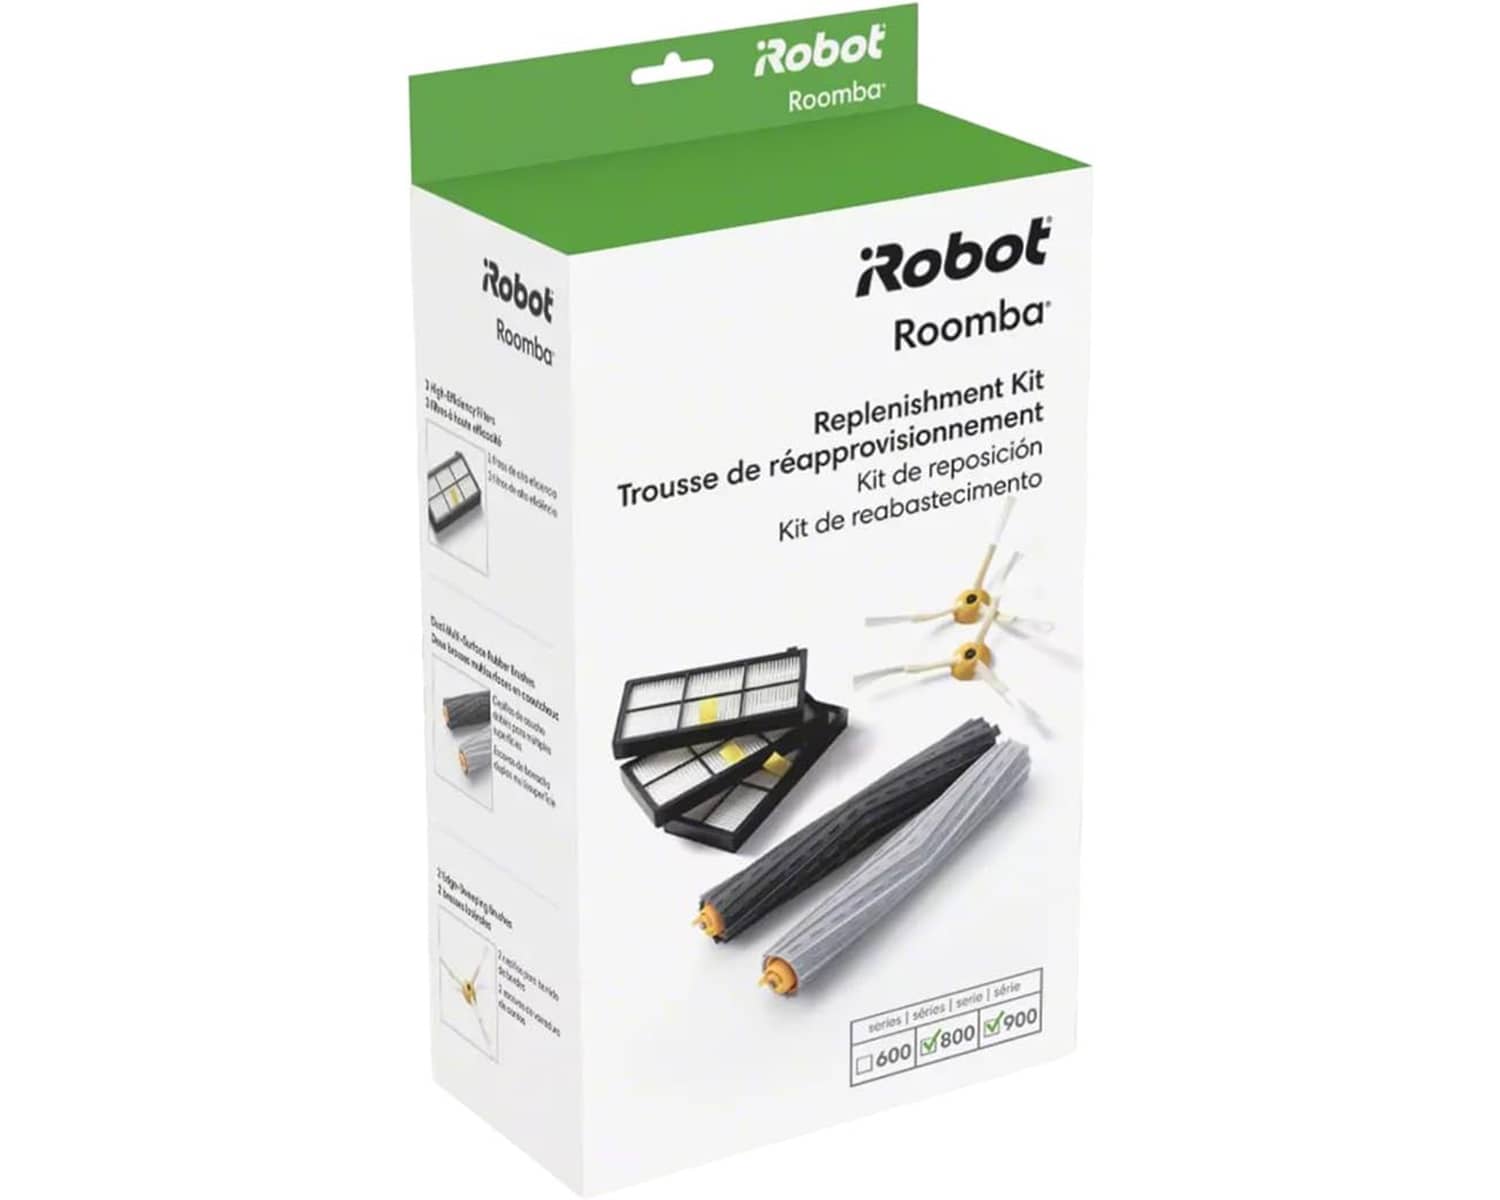 iRobot Roomba Authentic Replacement Parts - Roomba 800 and 900 Series Replenishment Kit